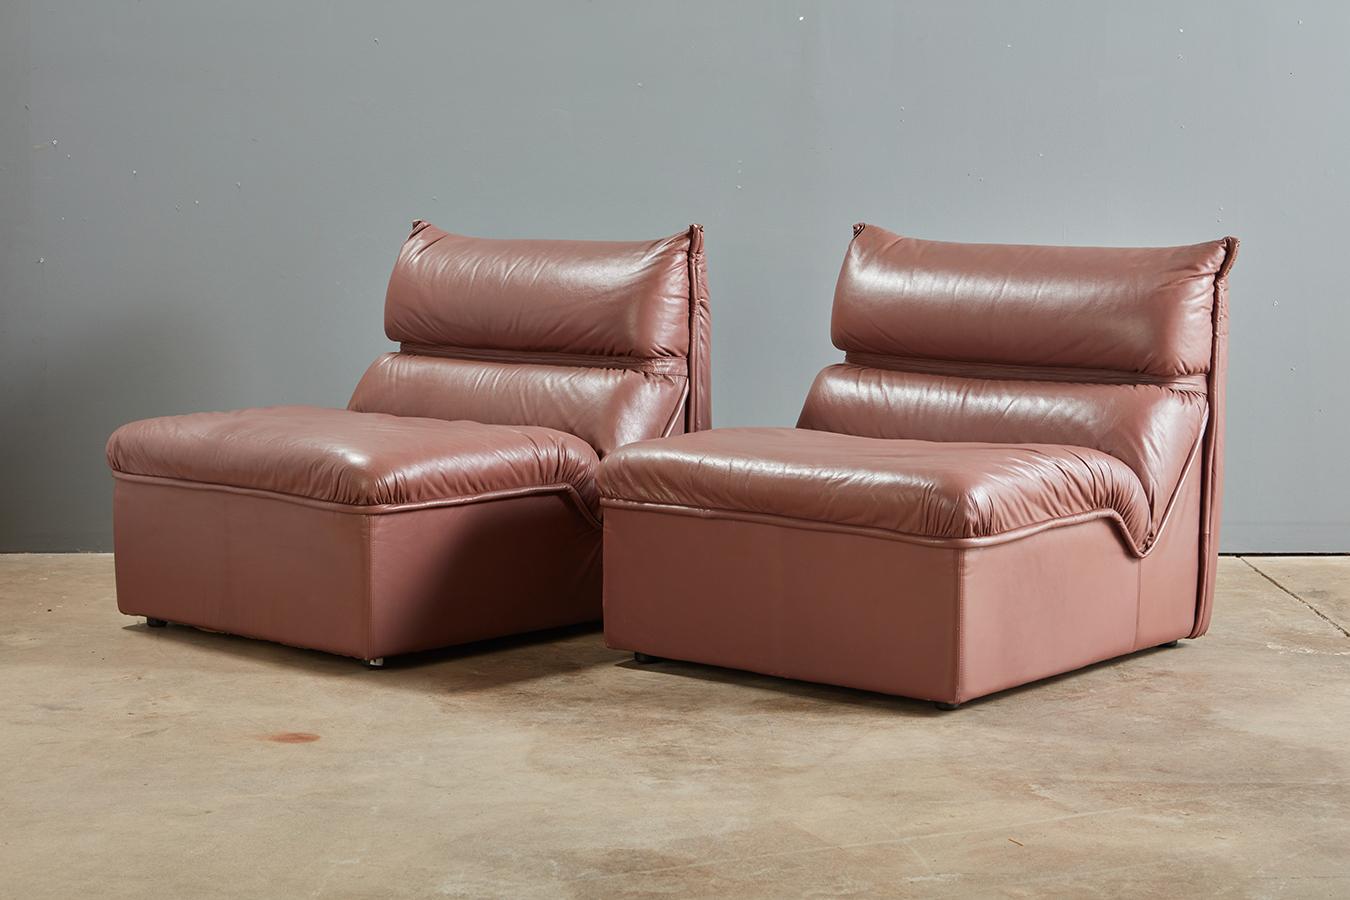 Pair of Leather Lounge Chairs by Guido Faleschini, I4 Mariani for Pace 2